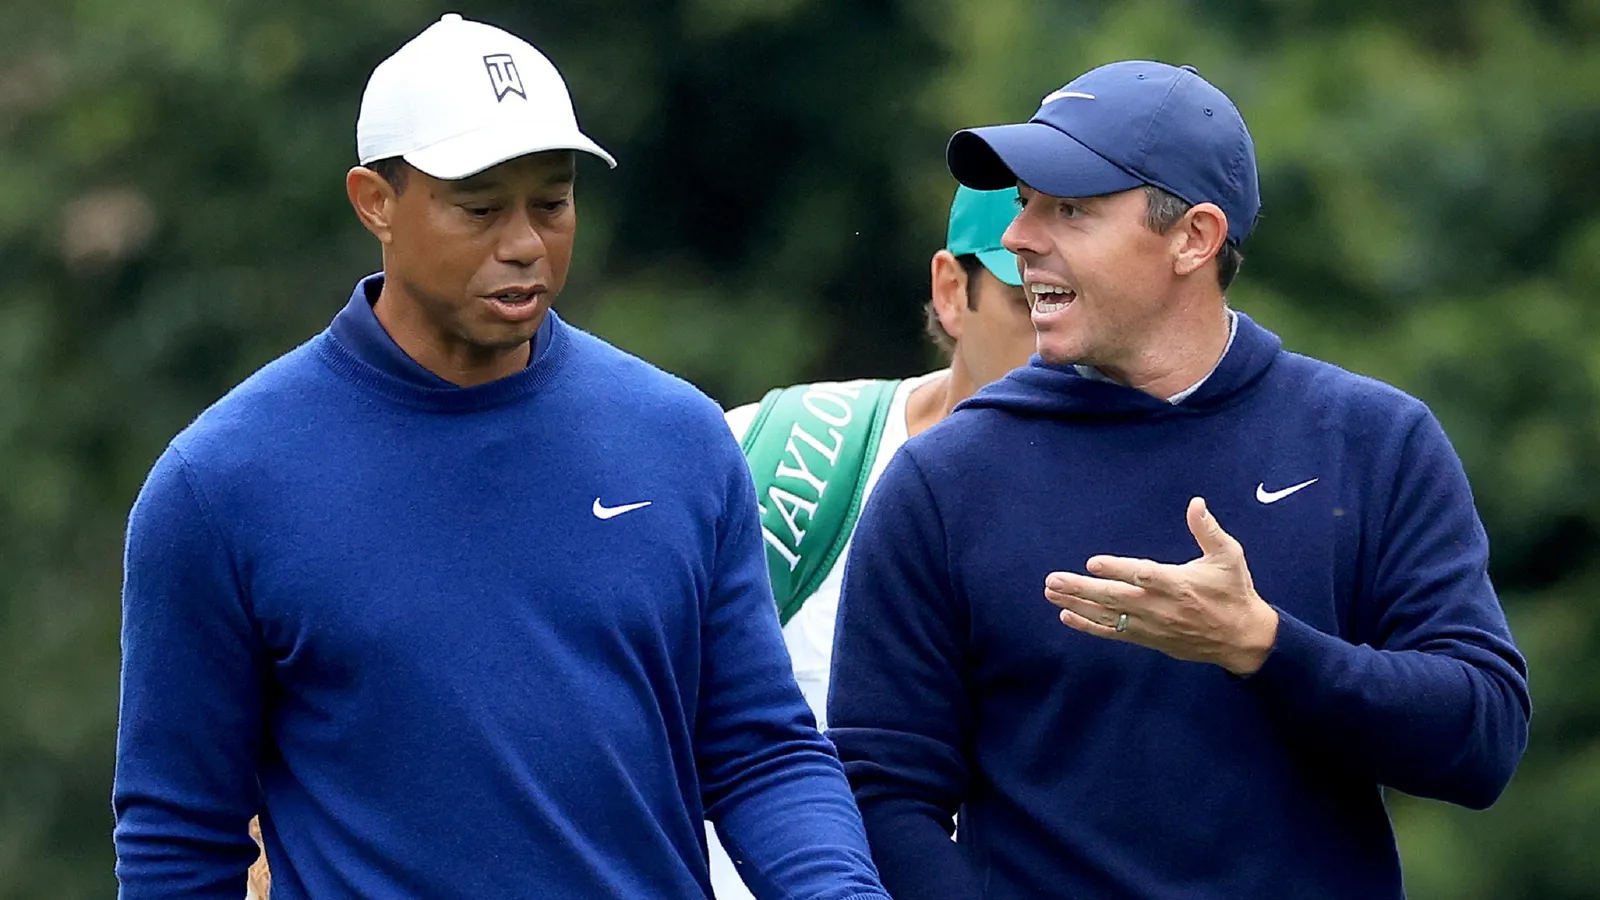 'Appreciative' McIlroy Has Renewed Enthusiasm After Swing Advice From Woods